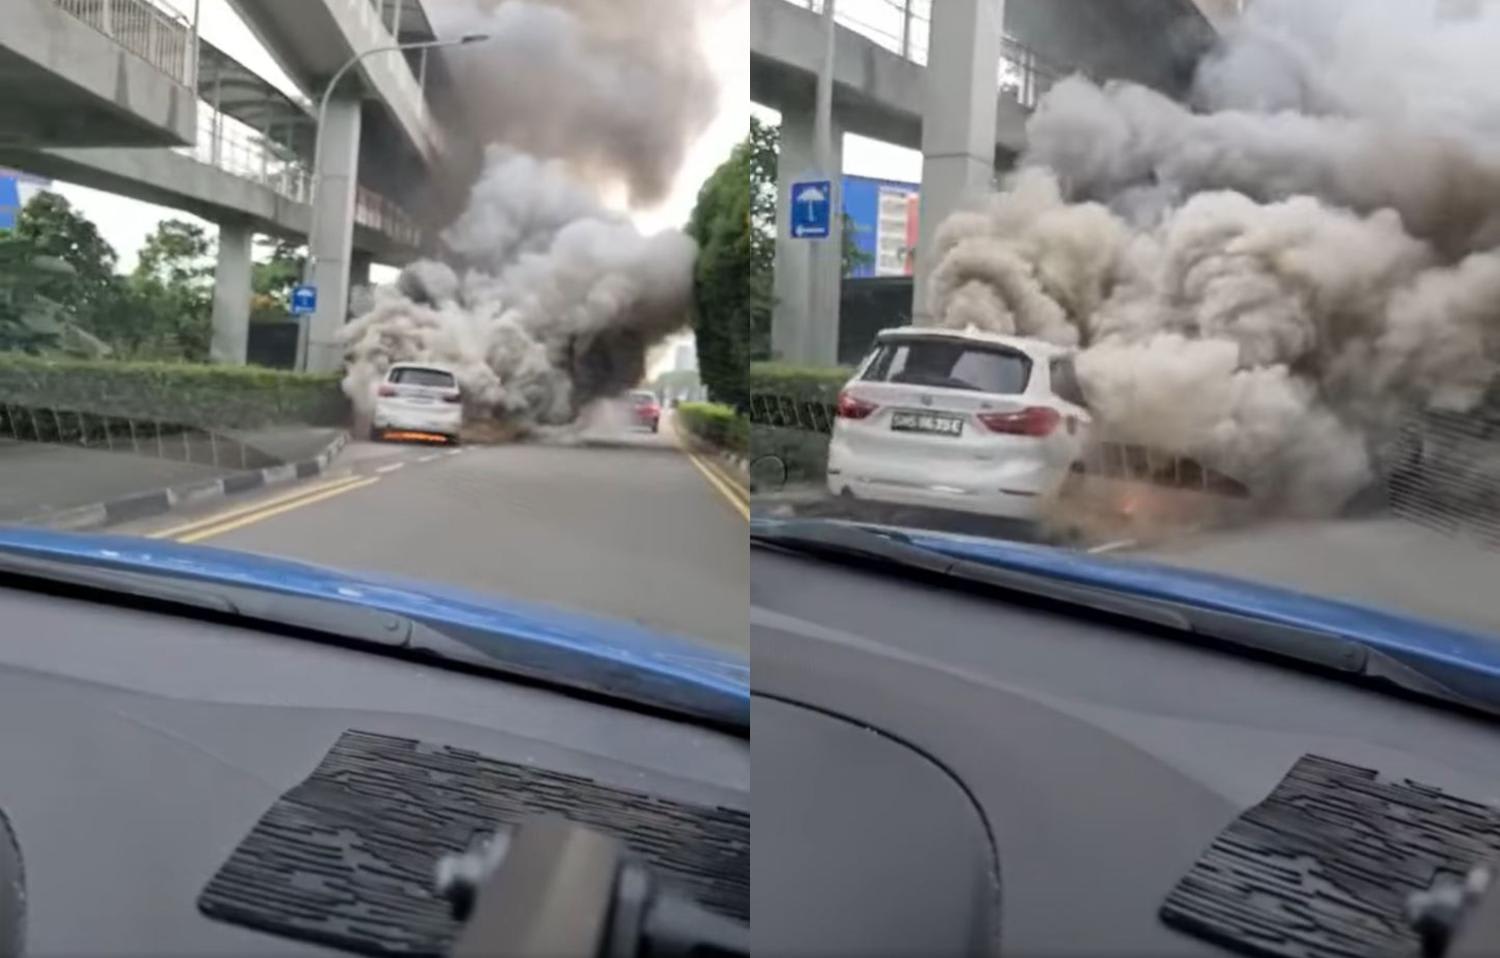 In a video posted on the Singapore Taxi Driver Facebook group, a car on fire can be seen along a slip road, with smoke billowing from its engine.